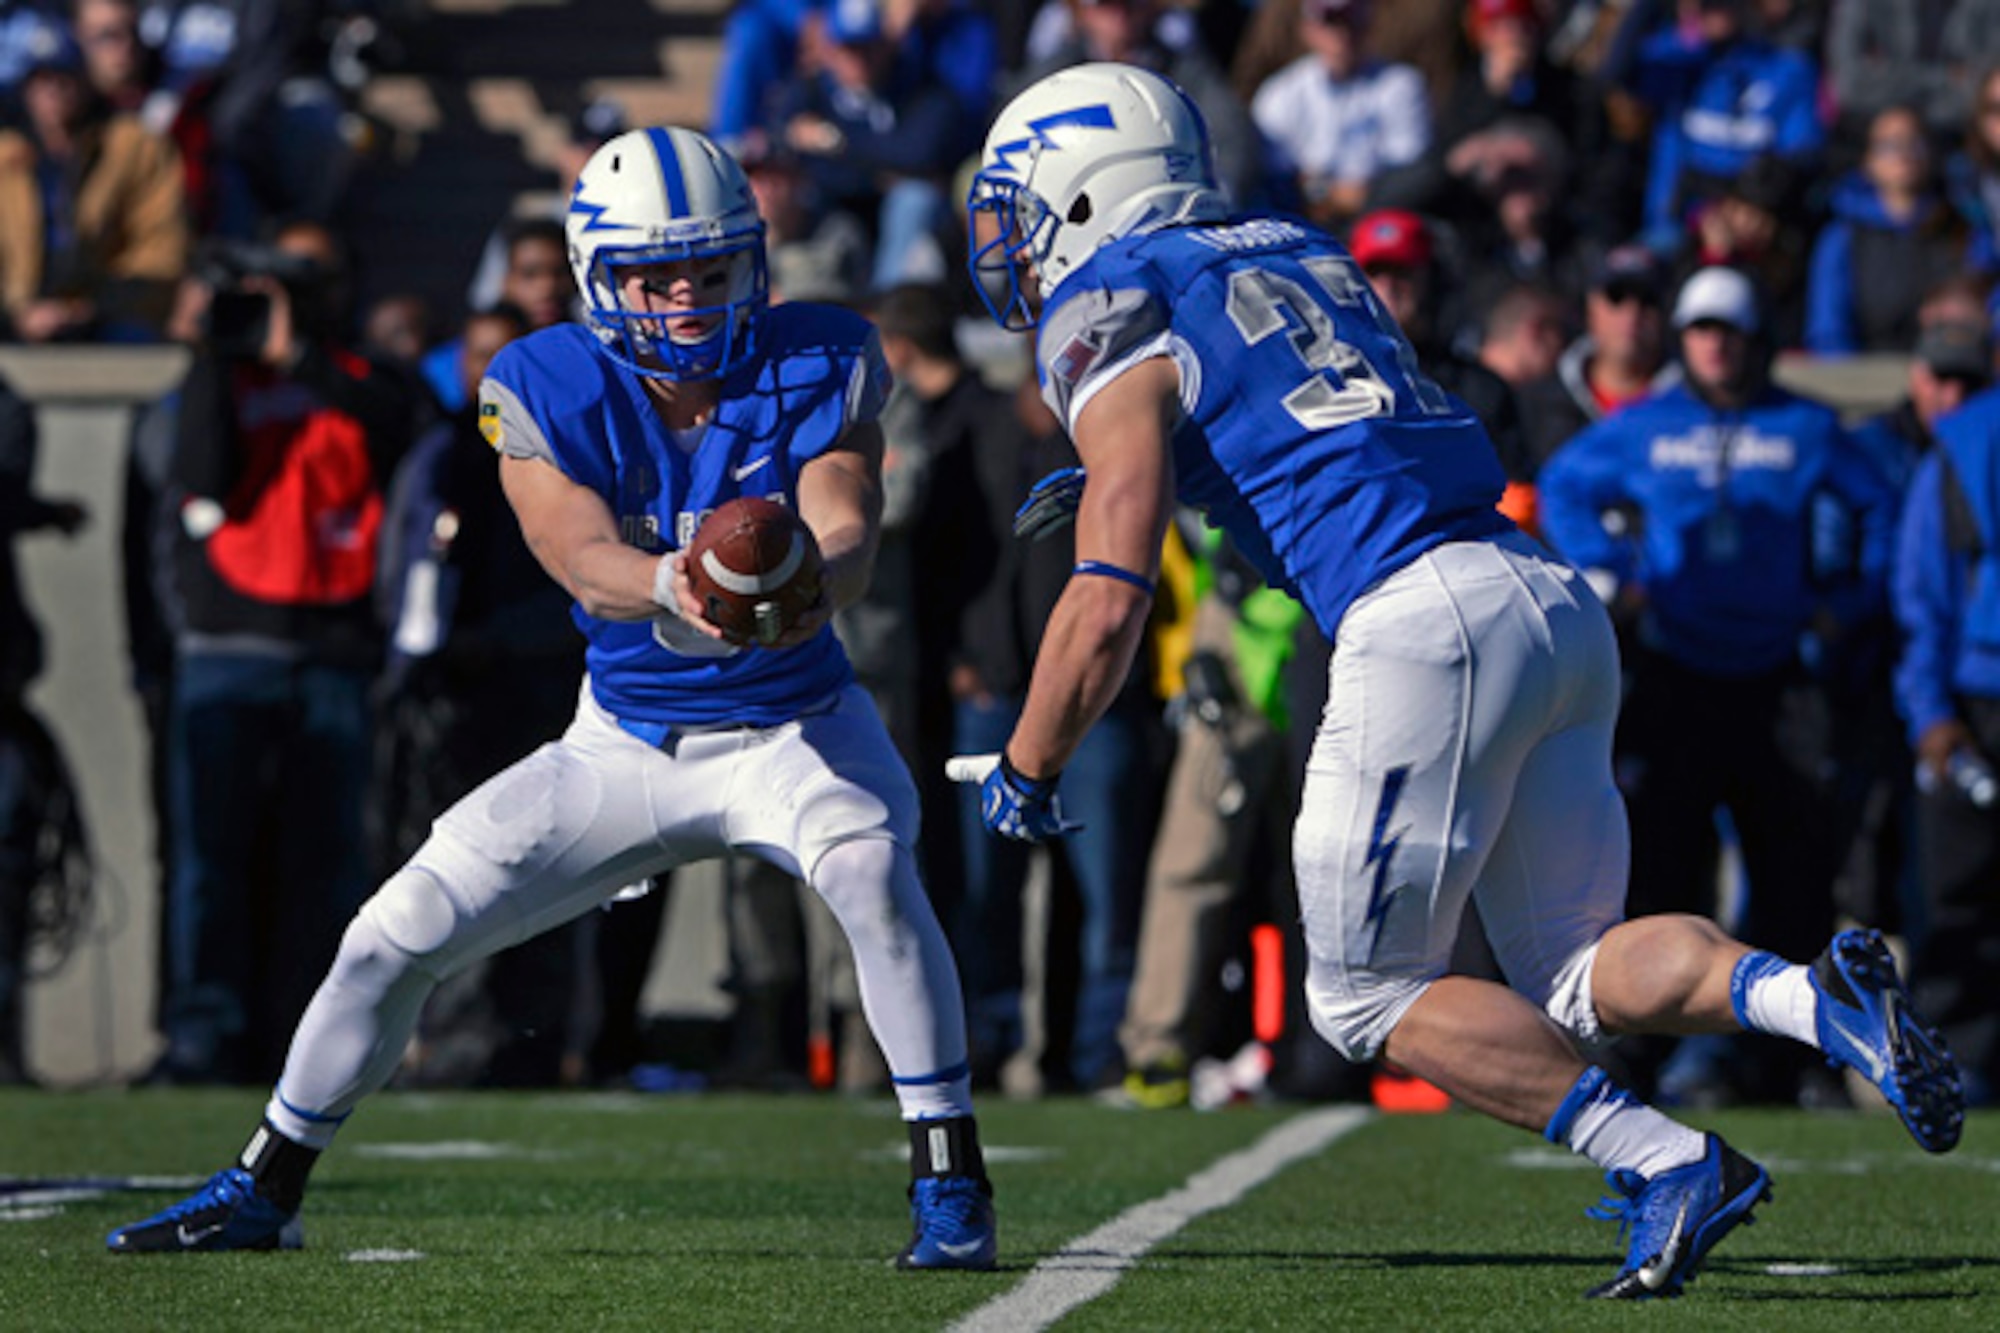 Air Force freshman quarterback Nate Romine hands off to senior running back Anthony LaCoste Nov. 2, 2013, during the Air Force-Army football game at Falcon Stadium, Colorado Springs, Colo. LaCoste scored on 73- and 78-yard runs to lead the Falcons over the Black Knights, 42-28.